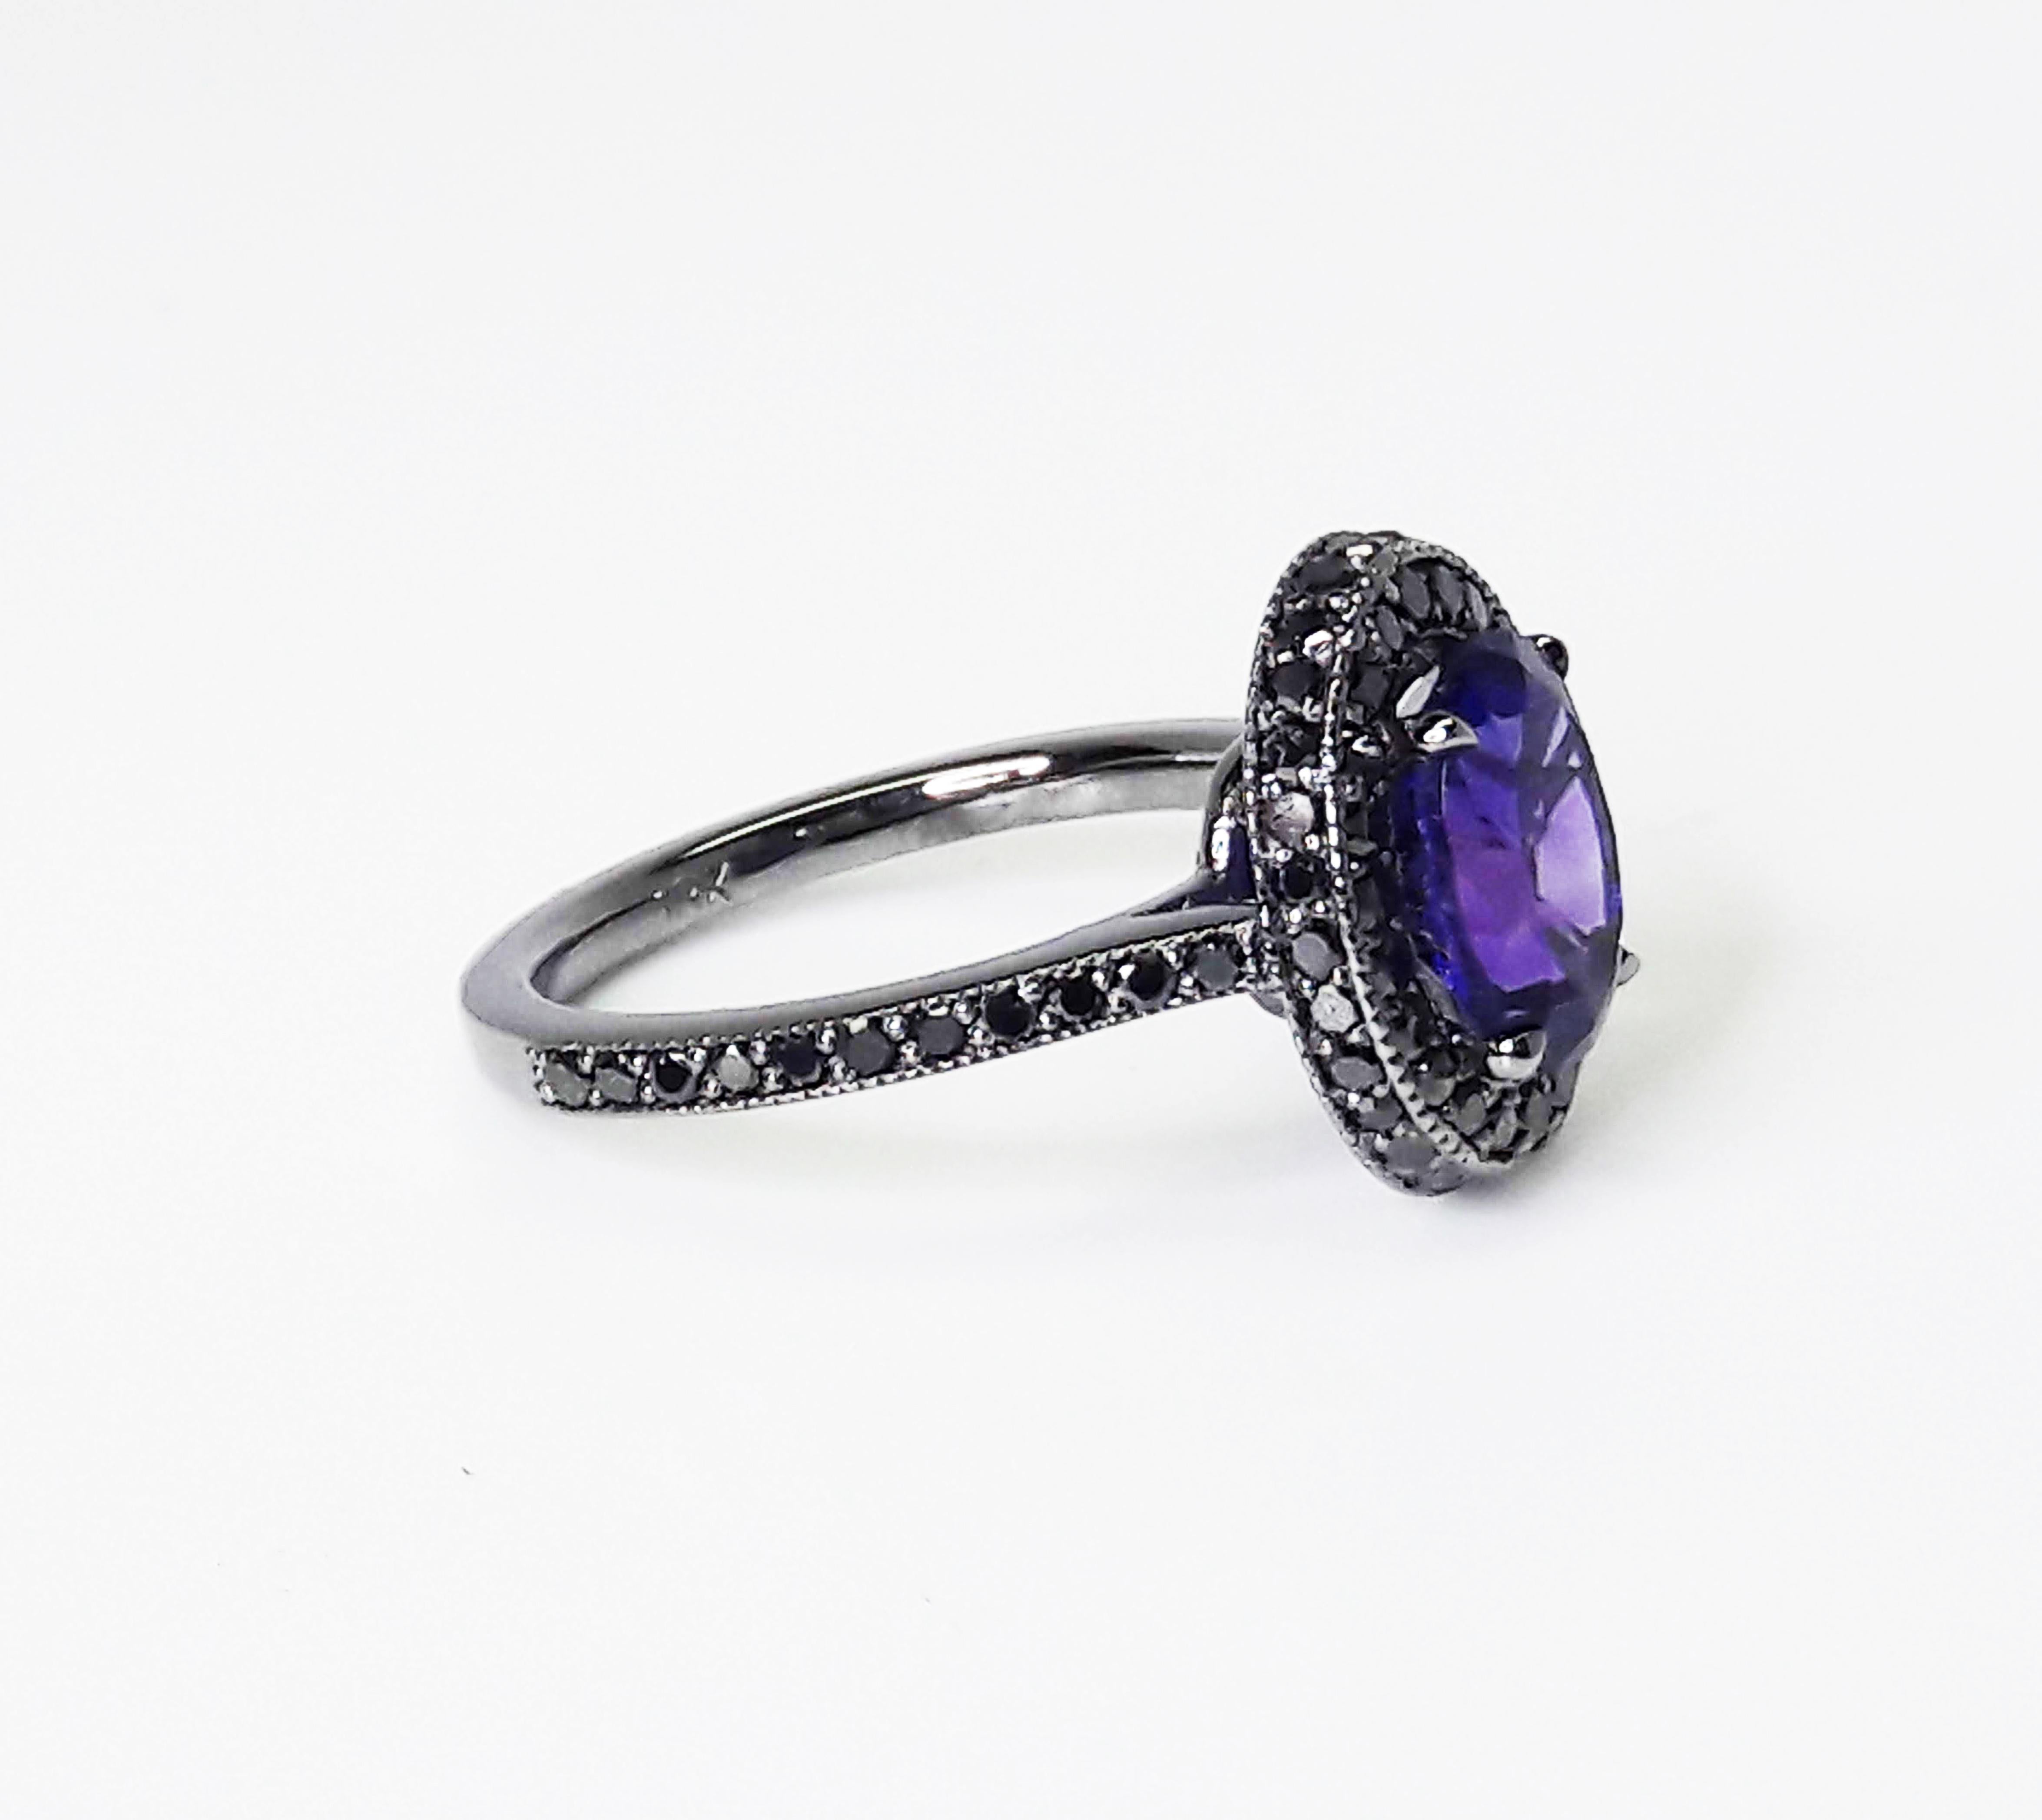 1.5 carat natural purple Amethyst adorned by a double halo of black diamonds for a total carat weight of 0.52 carats, conceived in a hand made 18k white gold ring, black rhodium plated.

Handcrafted with the best Italian manufacturing, modern touch